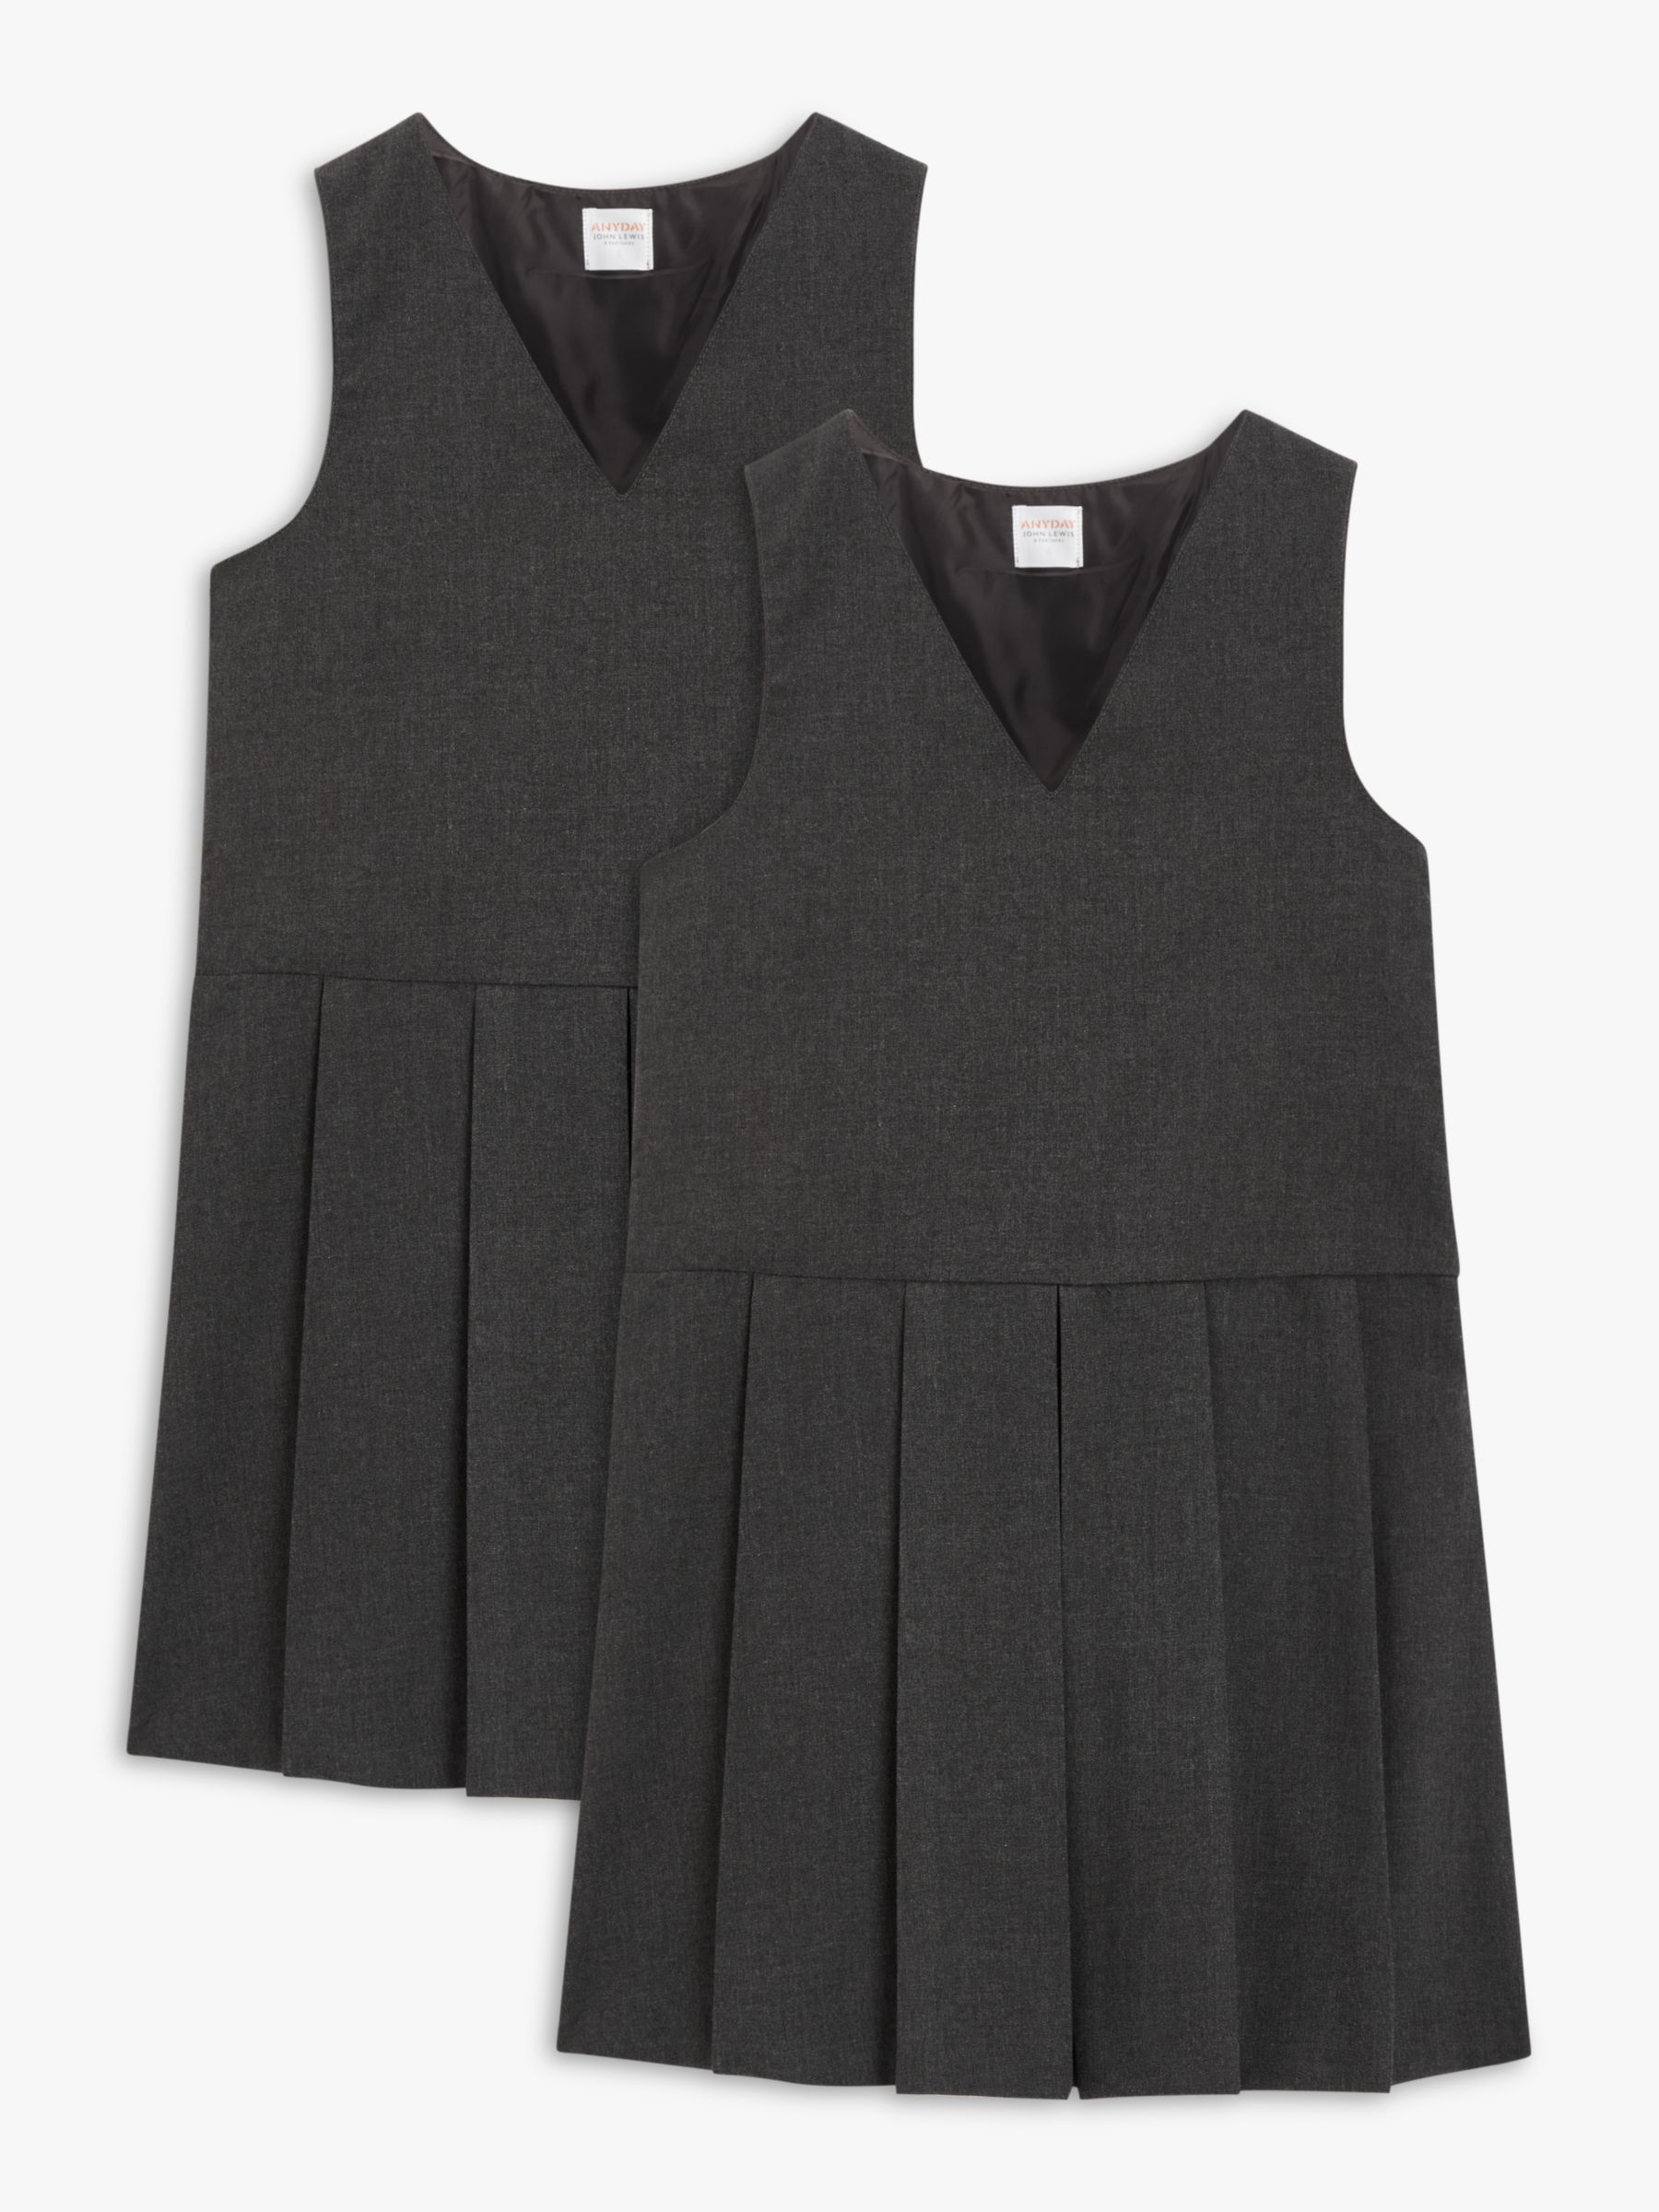 Buy John Lewis ANYDAY Girls' Pleated School Tunic, Grey Online at johnlewis.com